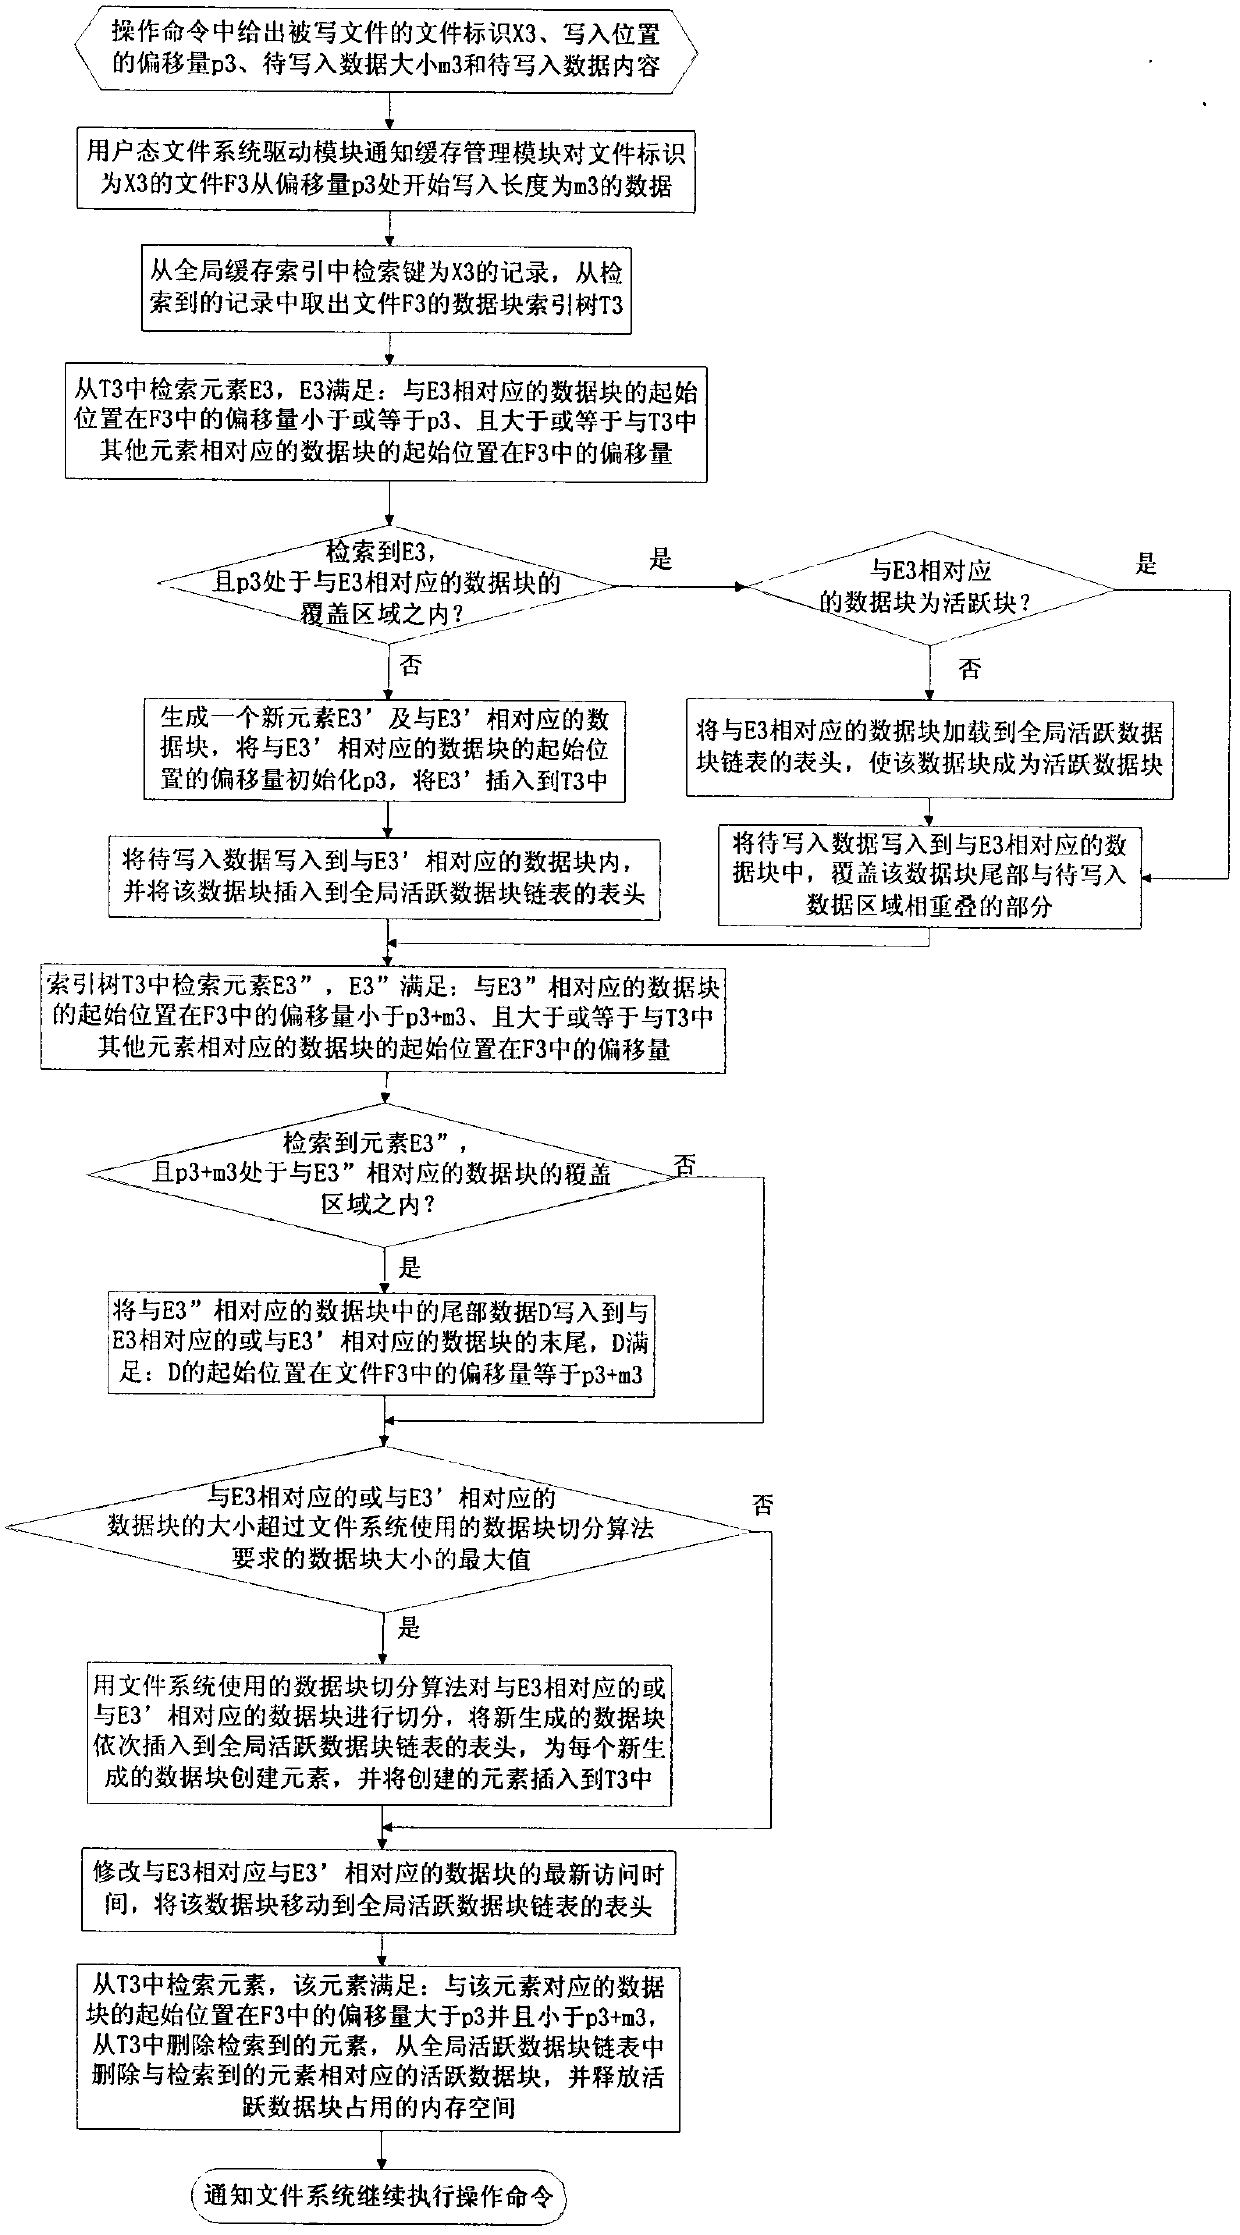 Cache method for file system with changeable data block length